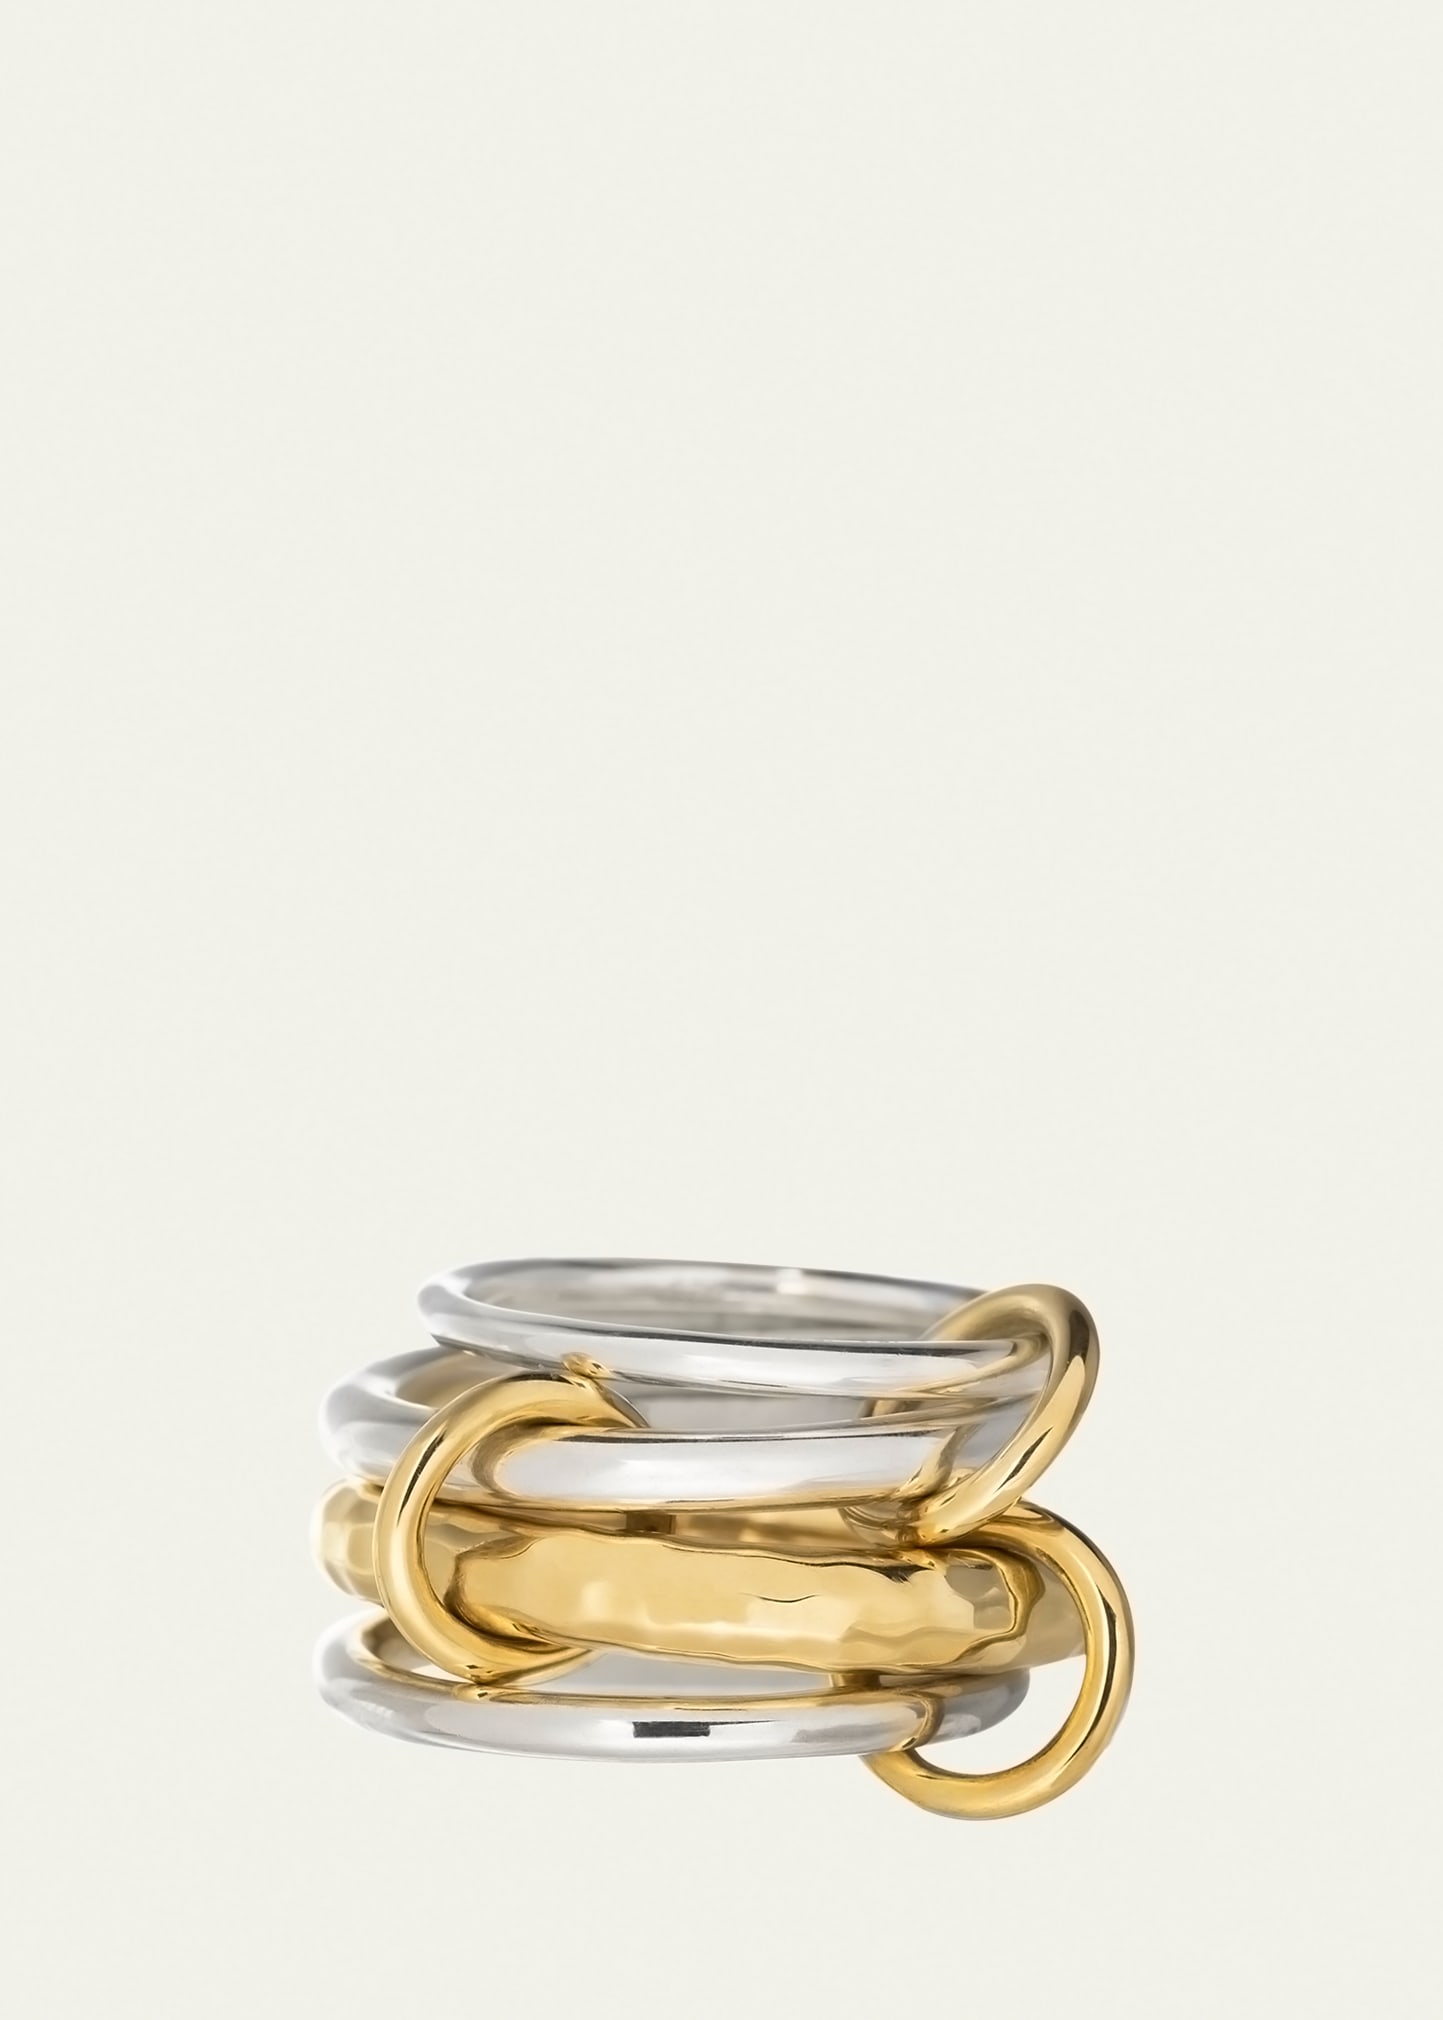 Janssen SY Vulcan Ring in Sterling Silver and 18K Yellow Gold